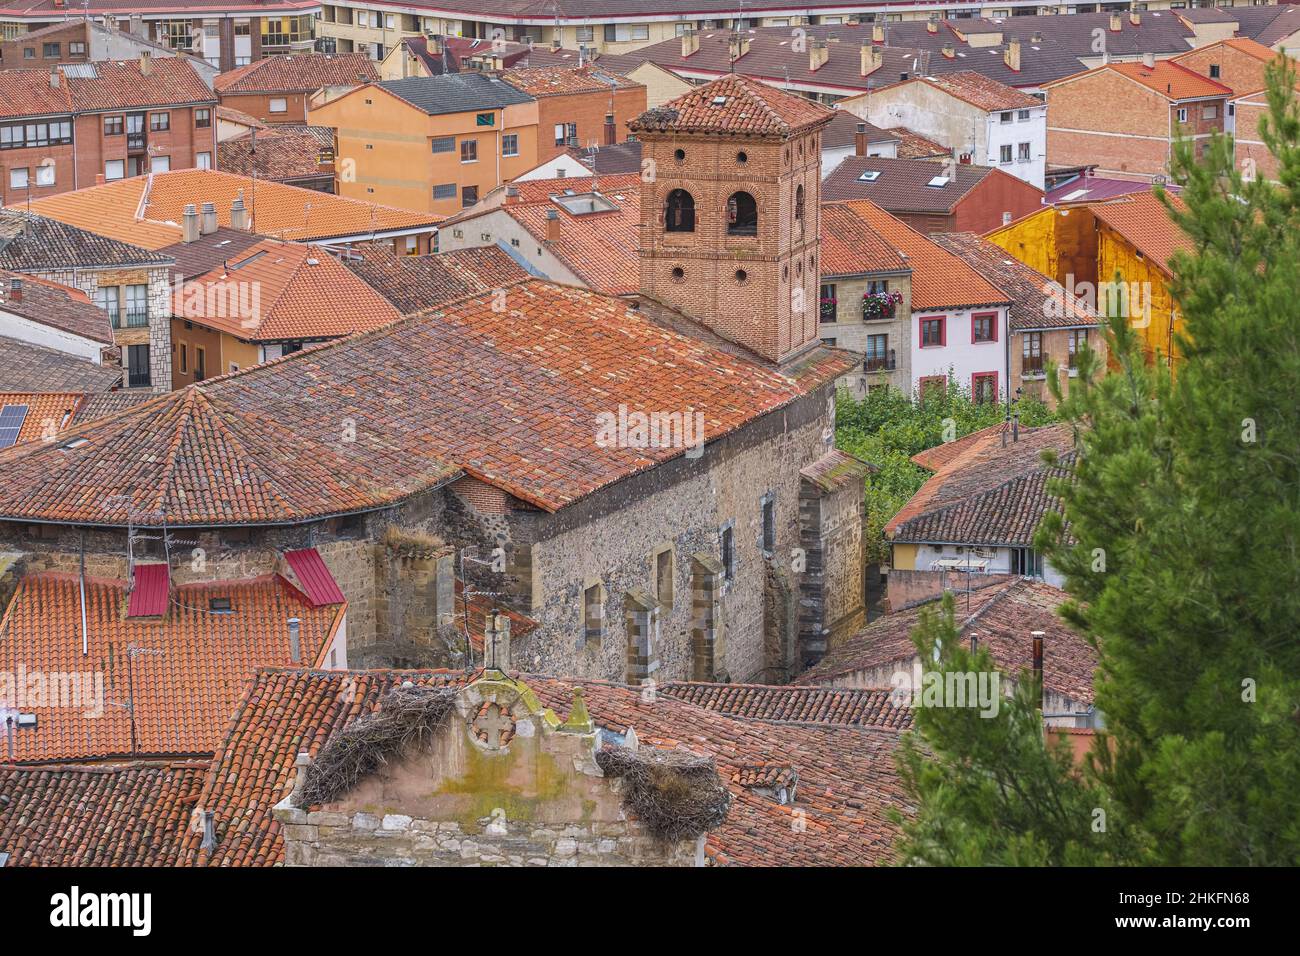 Spain, Castile and León, Belorado, stage on the Camino Francés, Spanish route of the pilgrimage to Santiago de Compostela, listed as a UNESCO World Heritage Site, San Pedro church Stock Photo